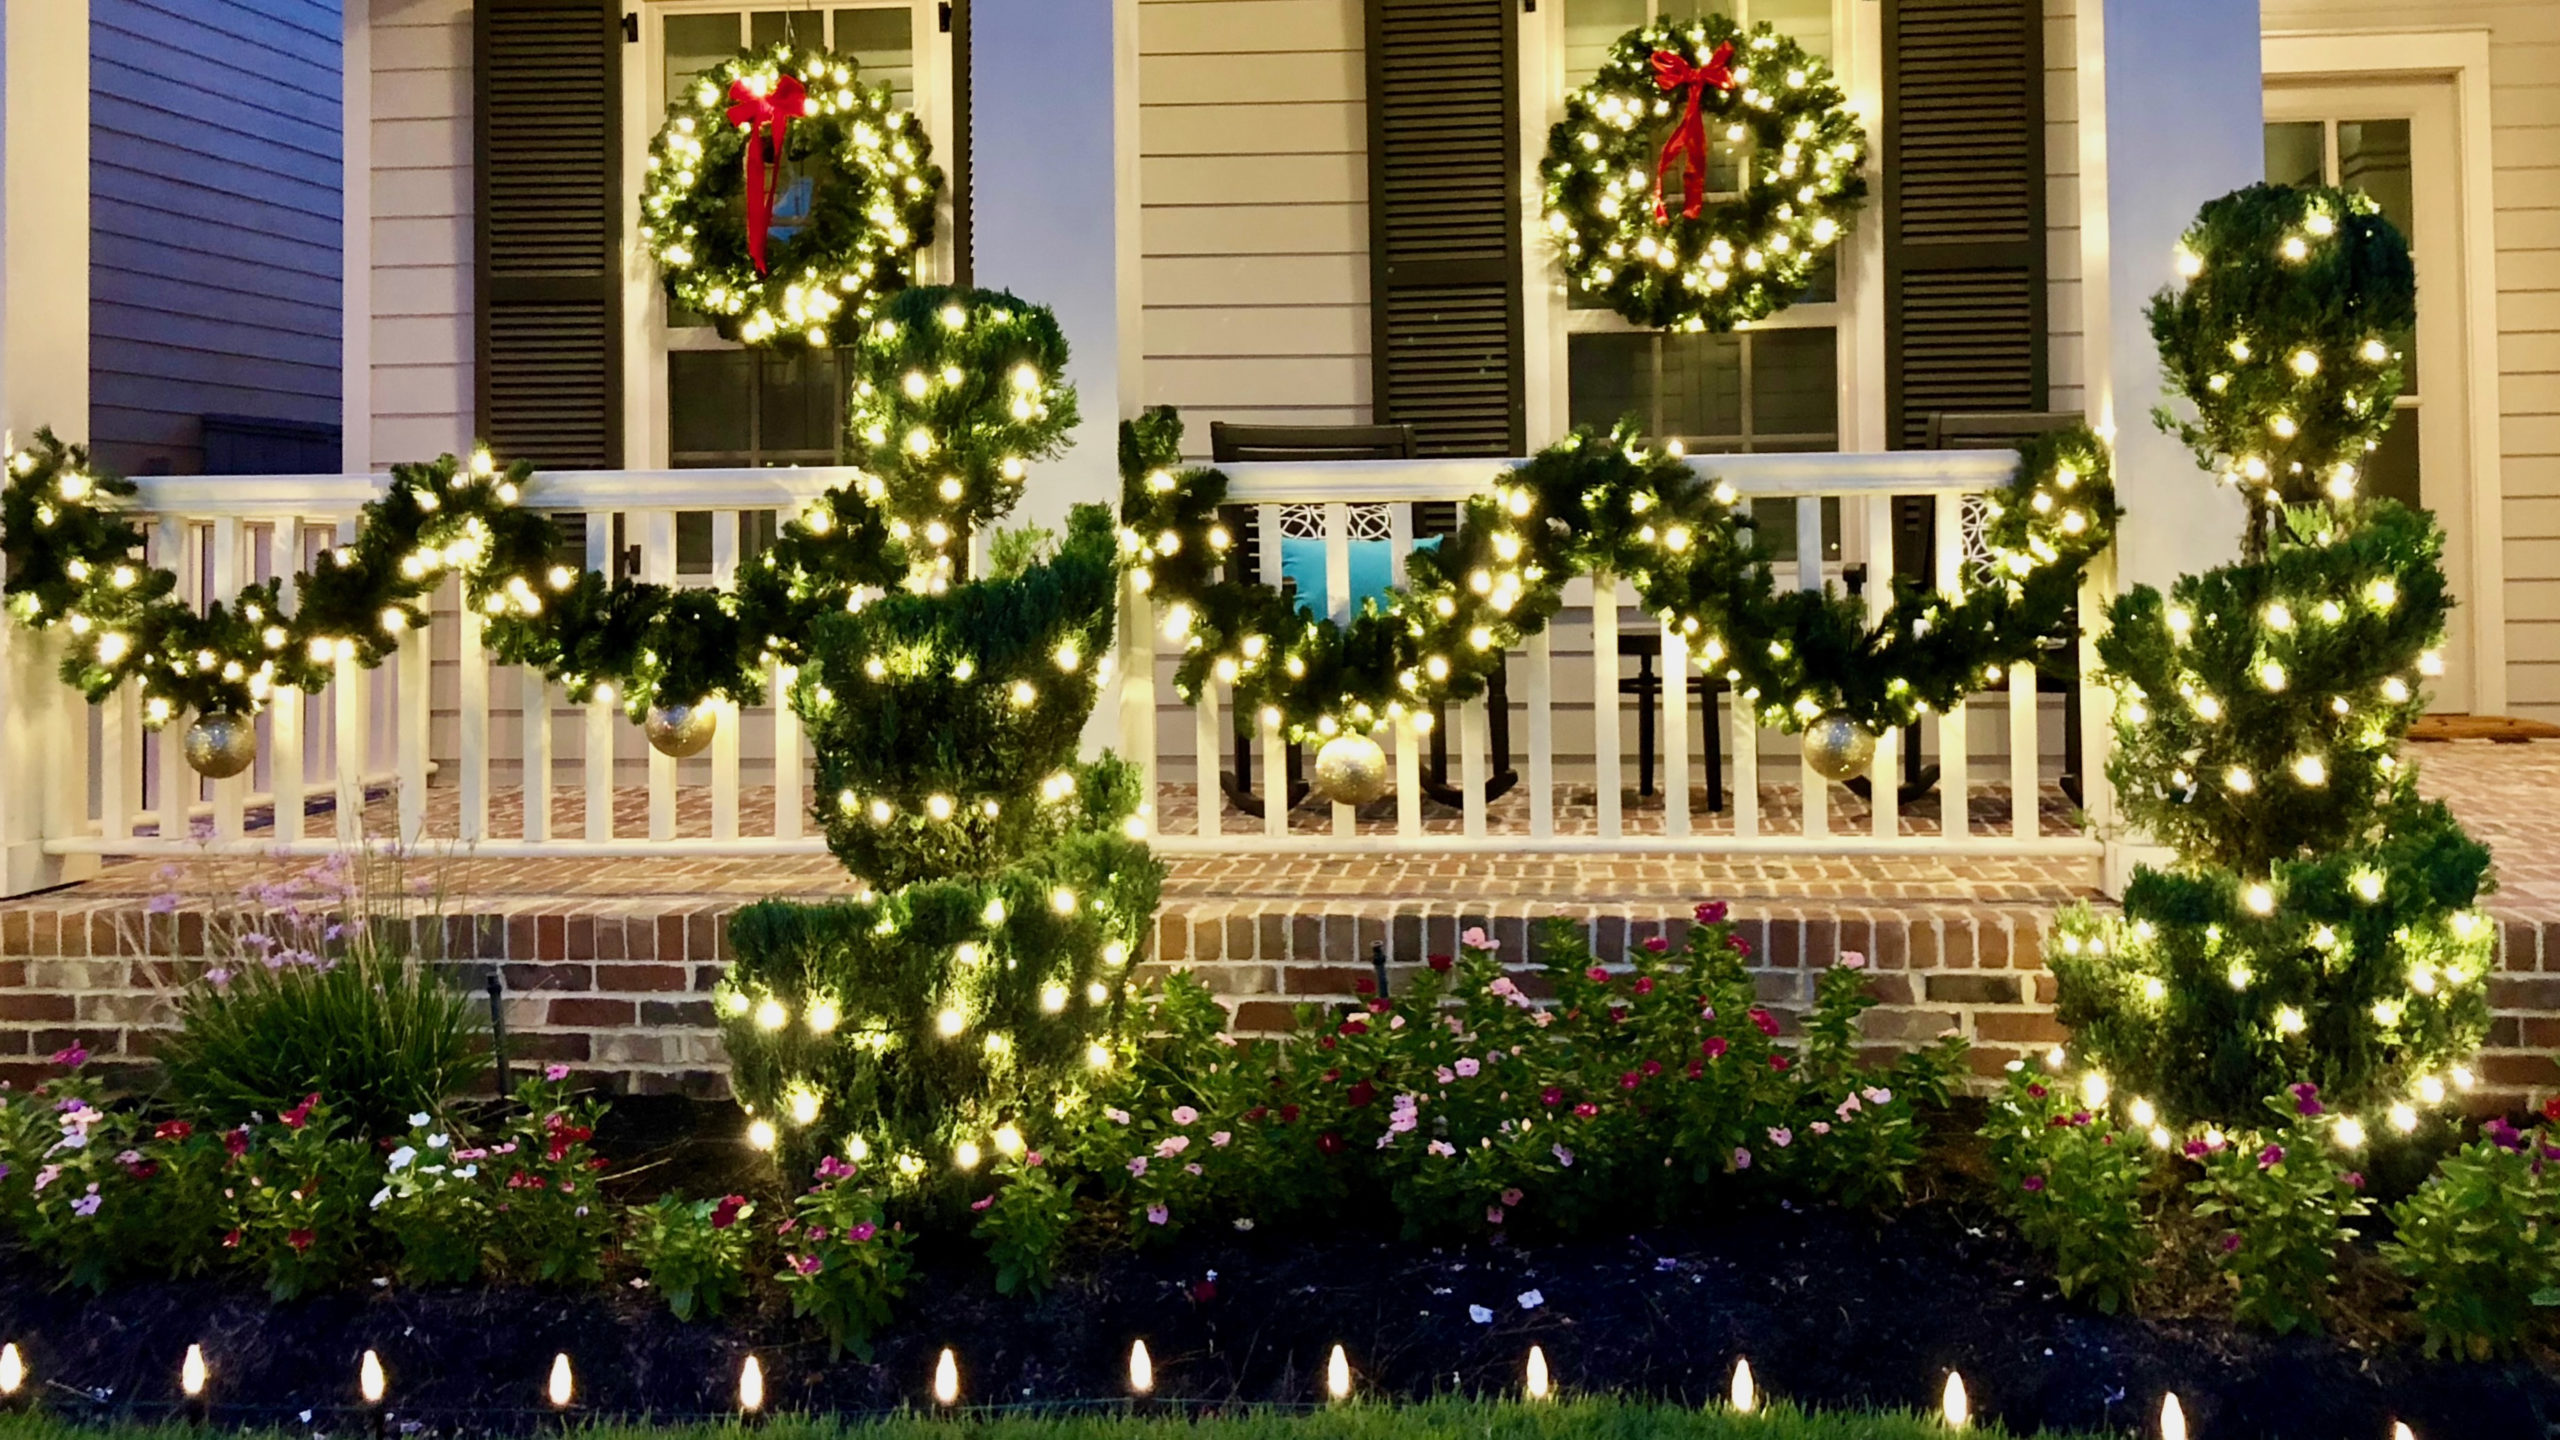 lights and garland on porch